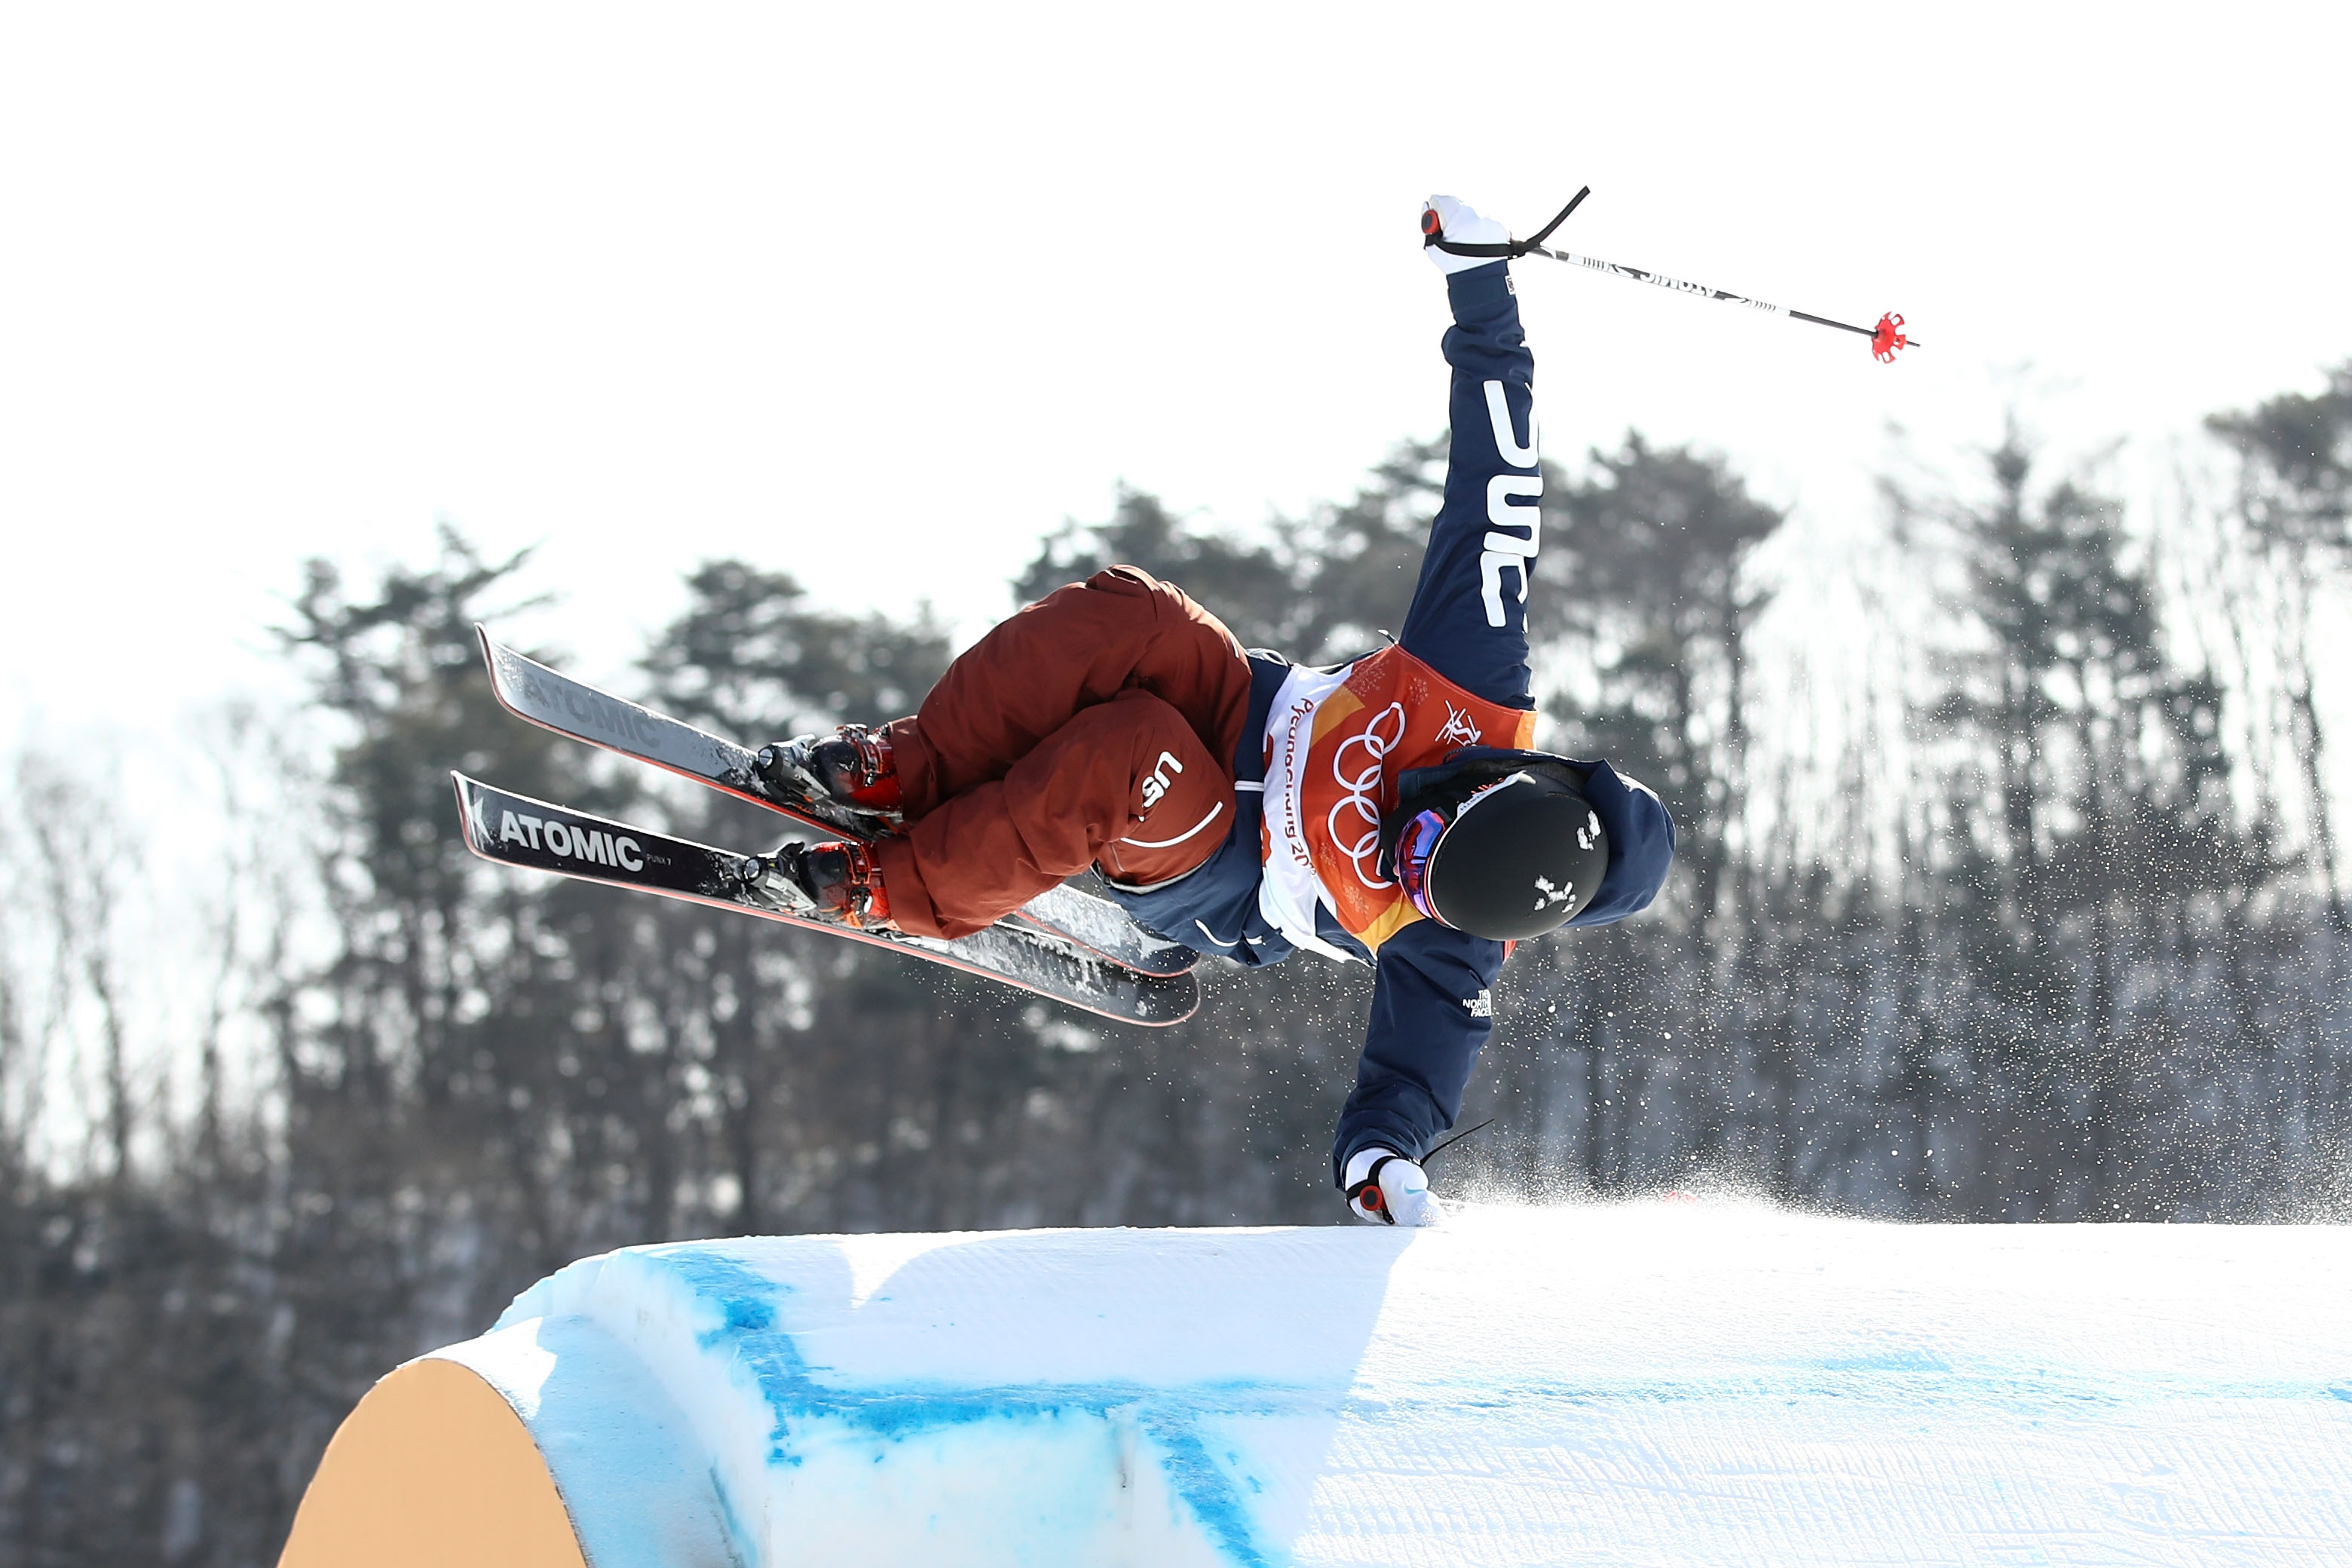 Gus Kenworthy of the United States competes during the men's ski slopestyle qualification at the PyeongChang 2018 Winter Olympic Games at Phoenix Snow Park on Feb. 18, 2018 in Pyeongchang-gun, South Korea. (Cameron Spencer/Getty Images)